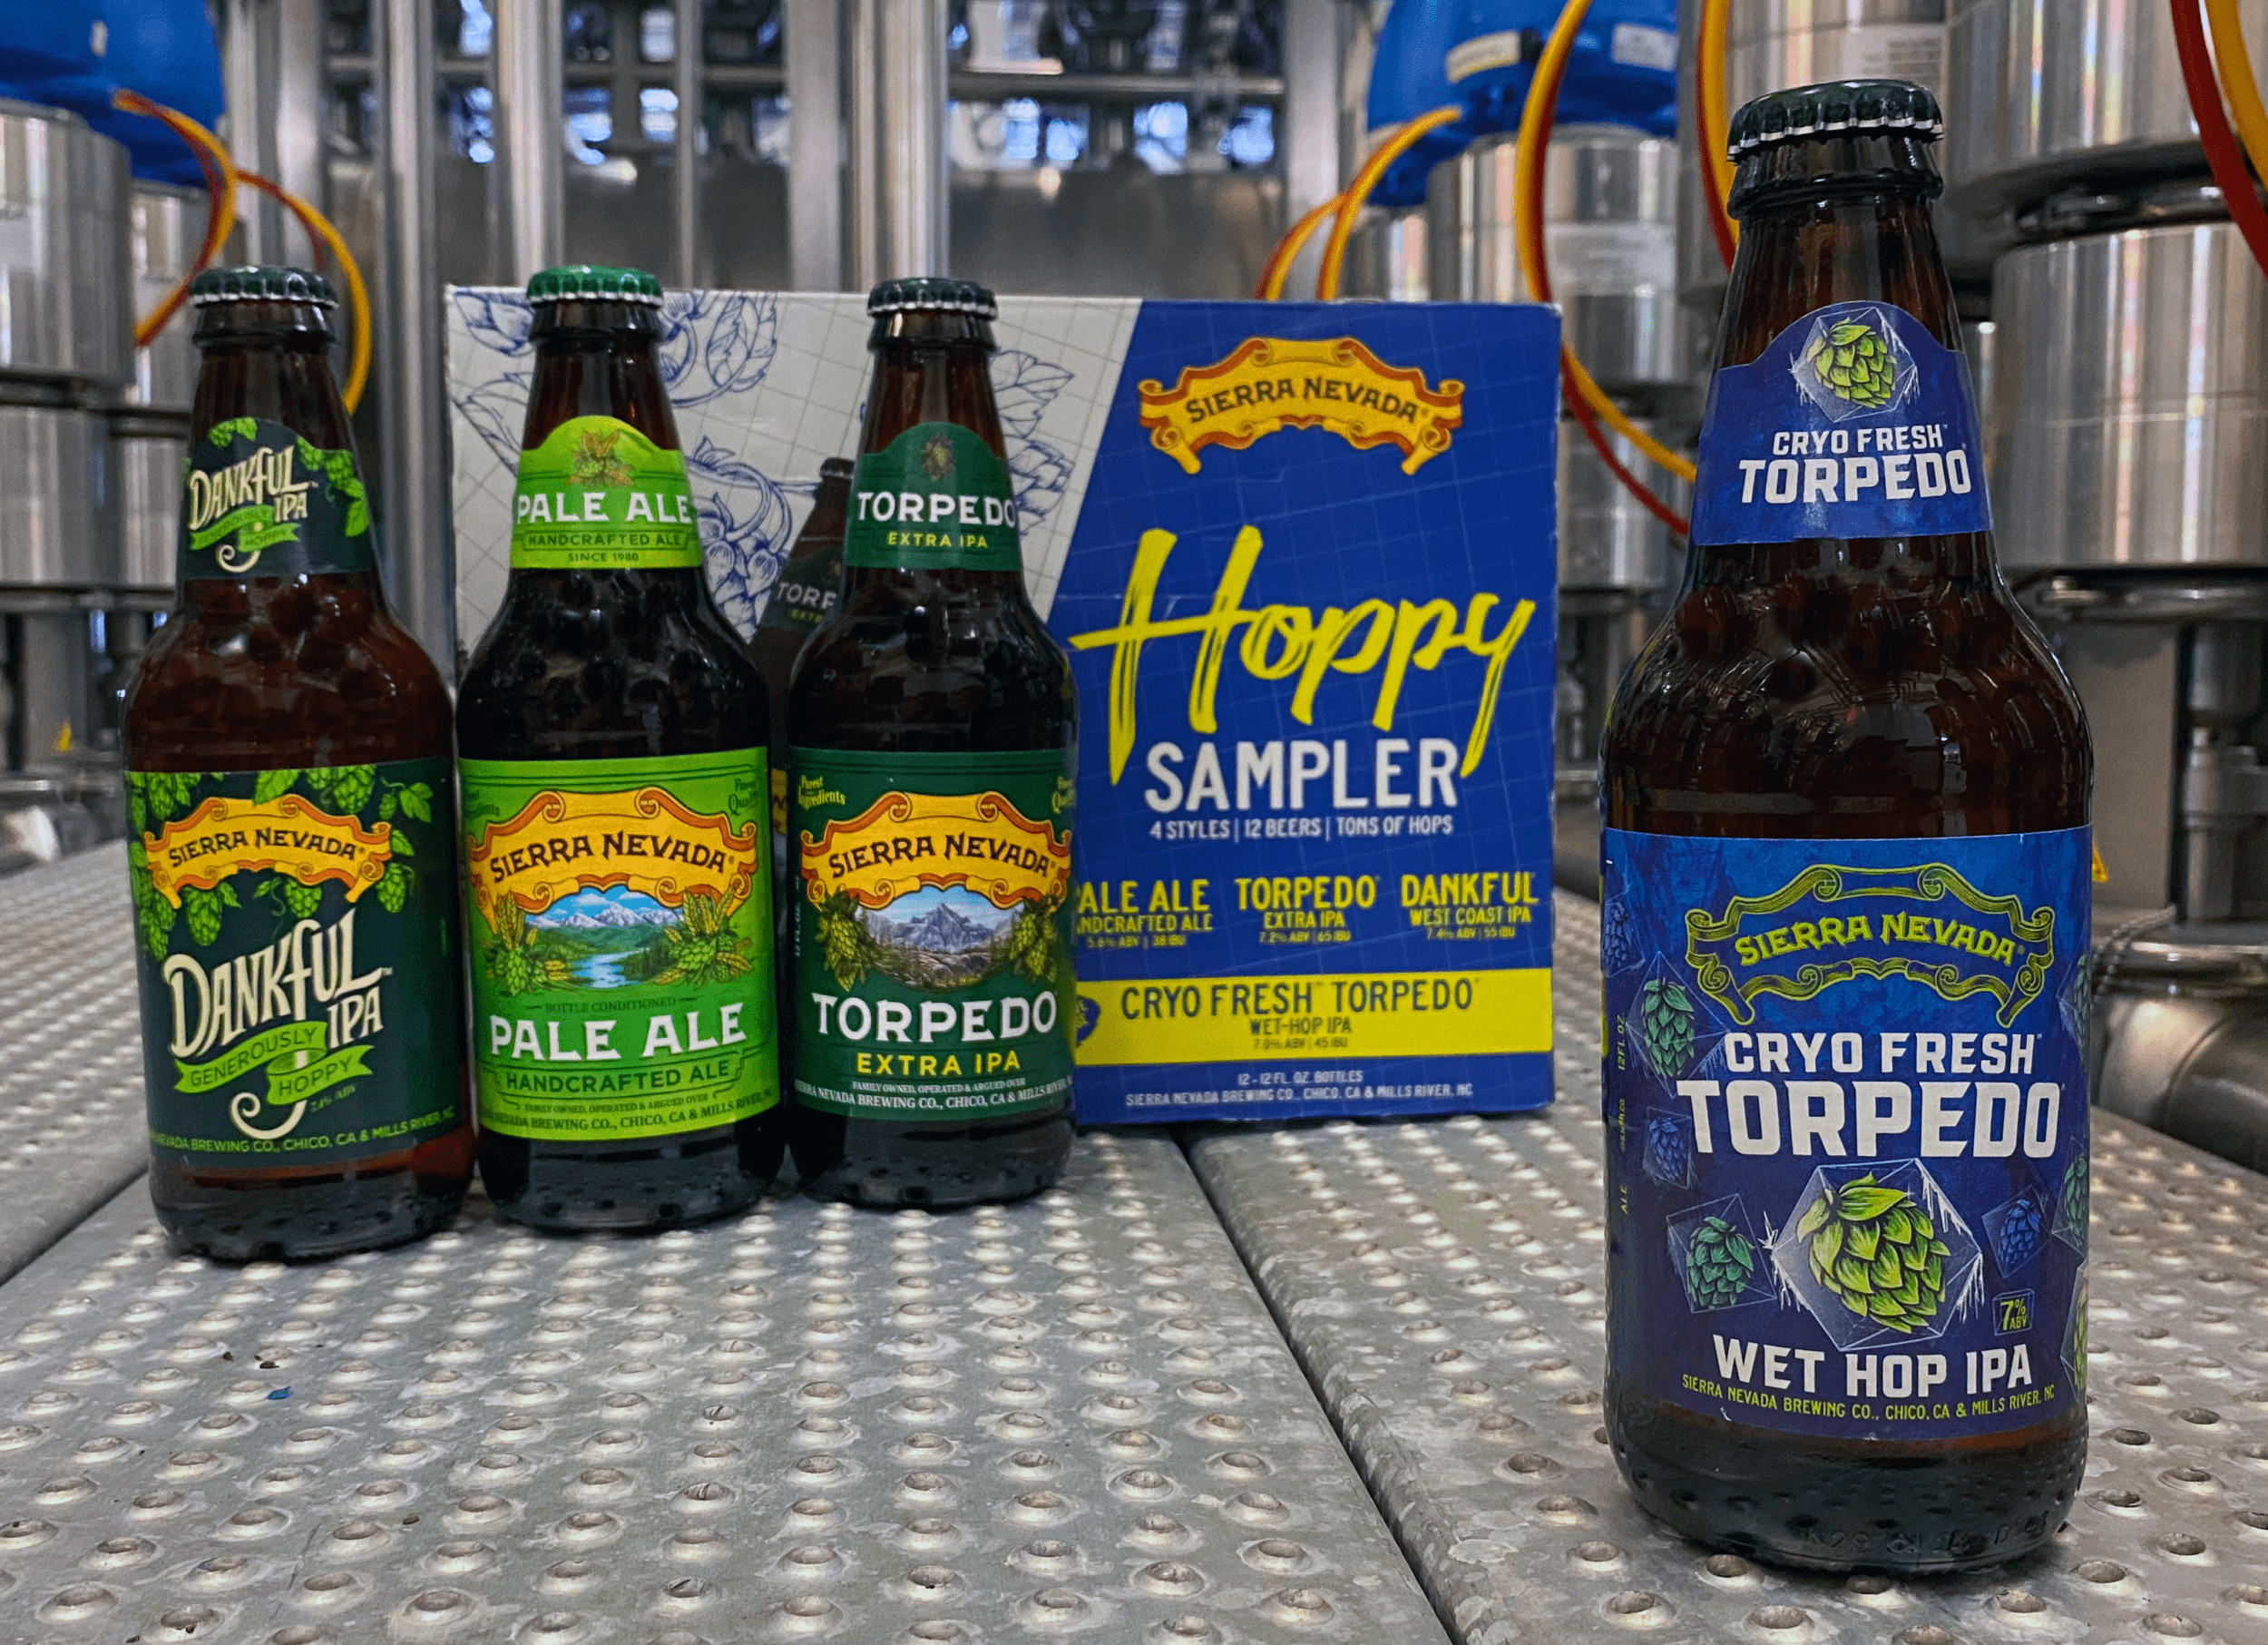 Pale Ale, Torpedo, Dankful and Hoppy Sampler all next to each other on an industrial surface.